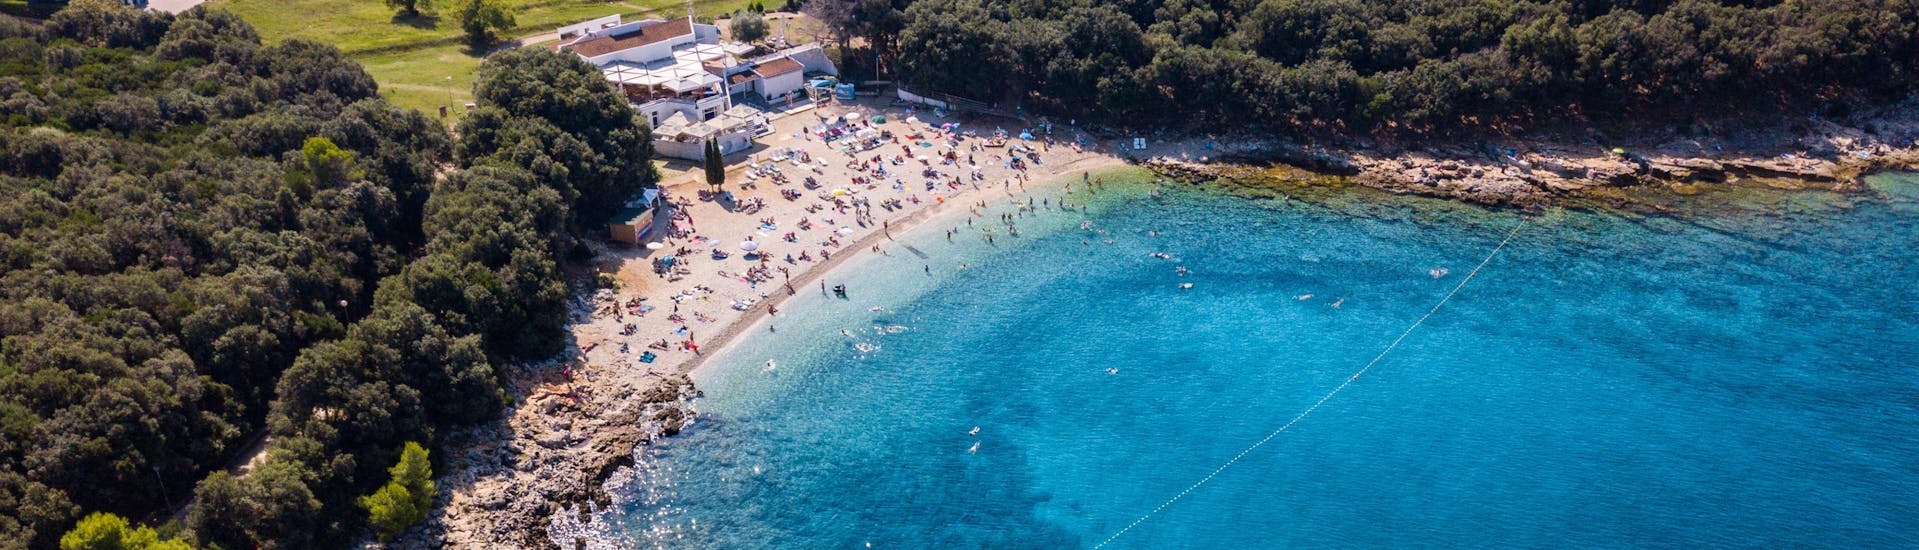 People having a good time at the beach in Verudela in Croatia.